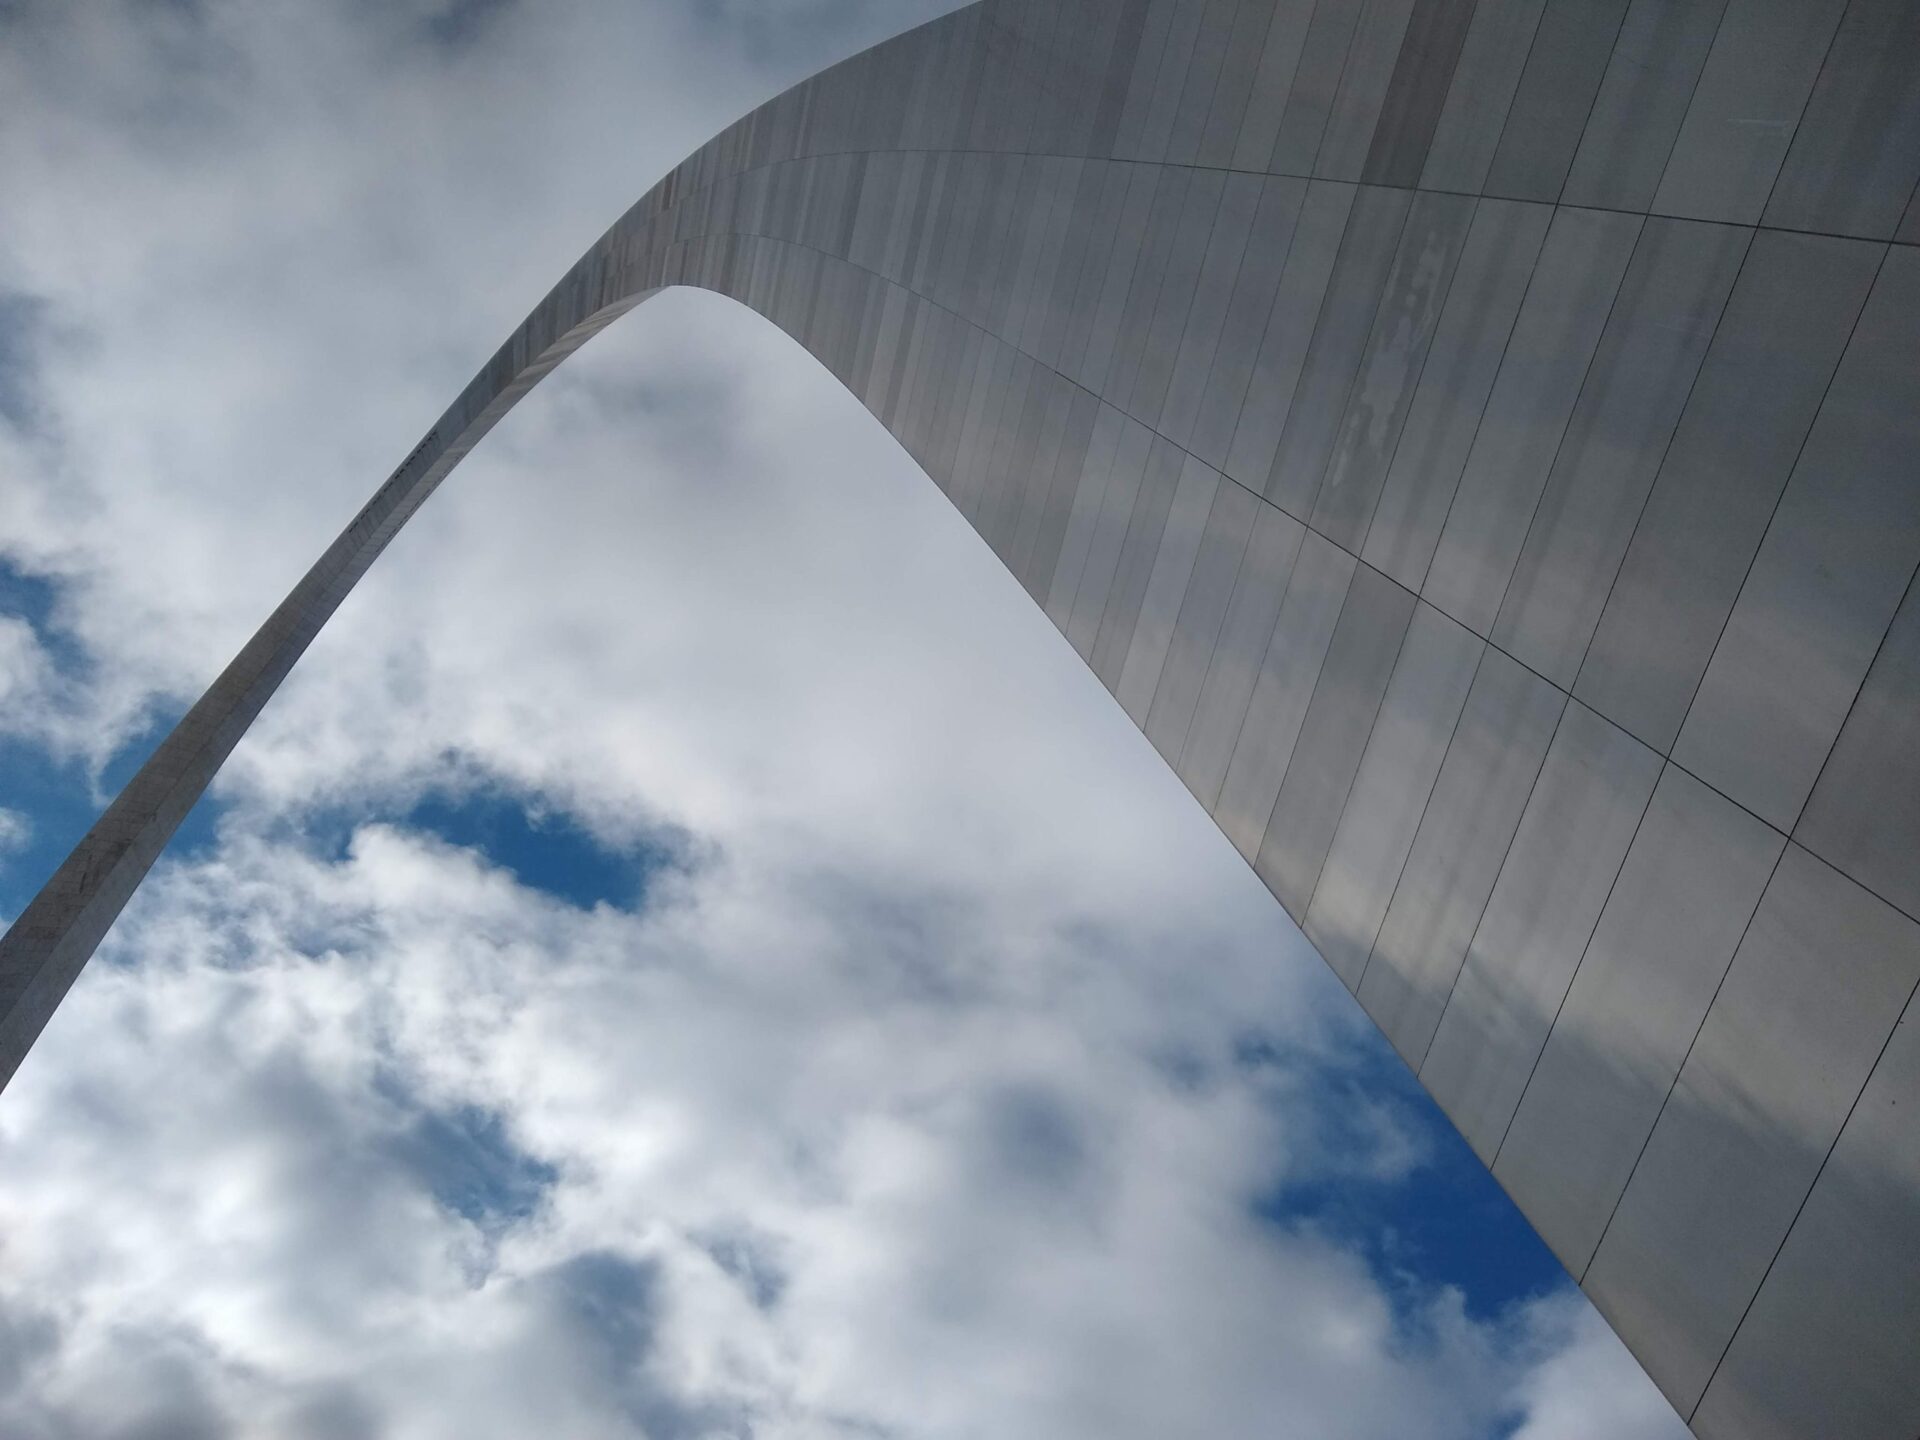 Travel Tips: Taking Kids to the Arch in St. Louis